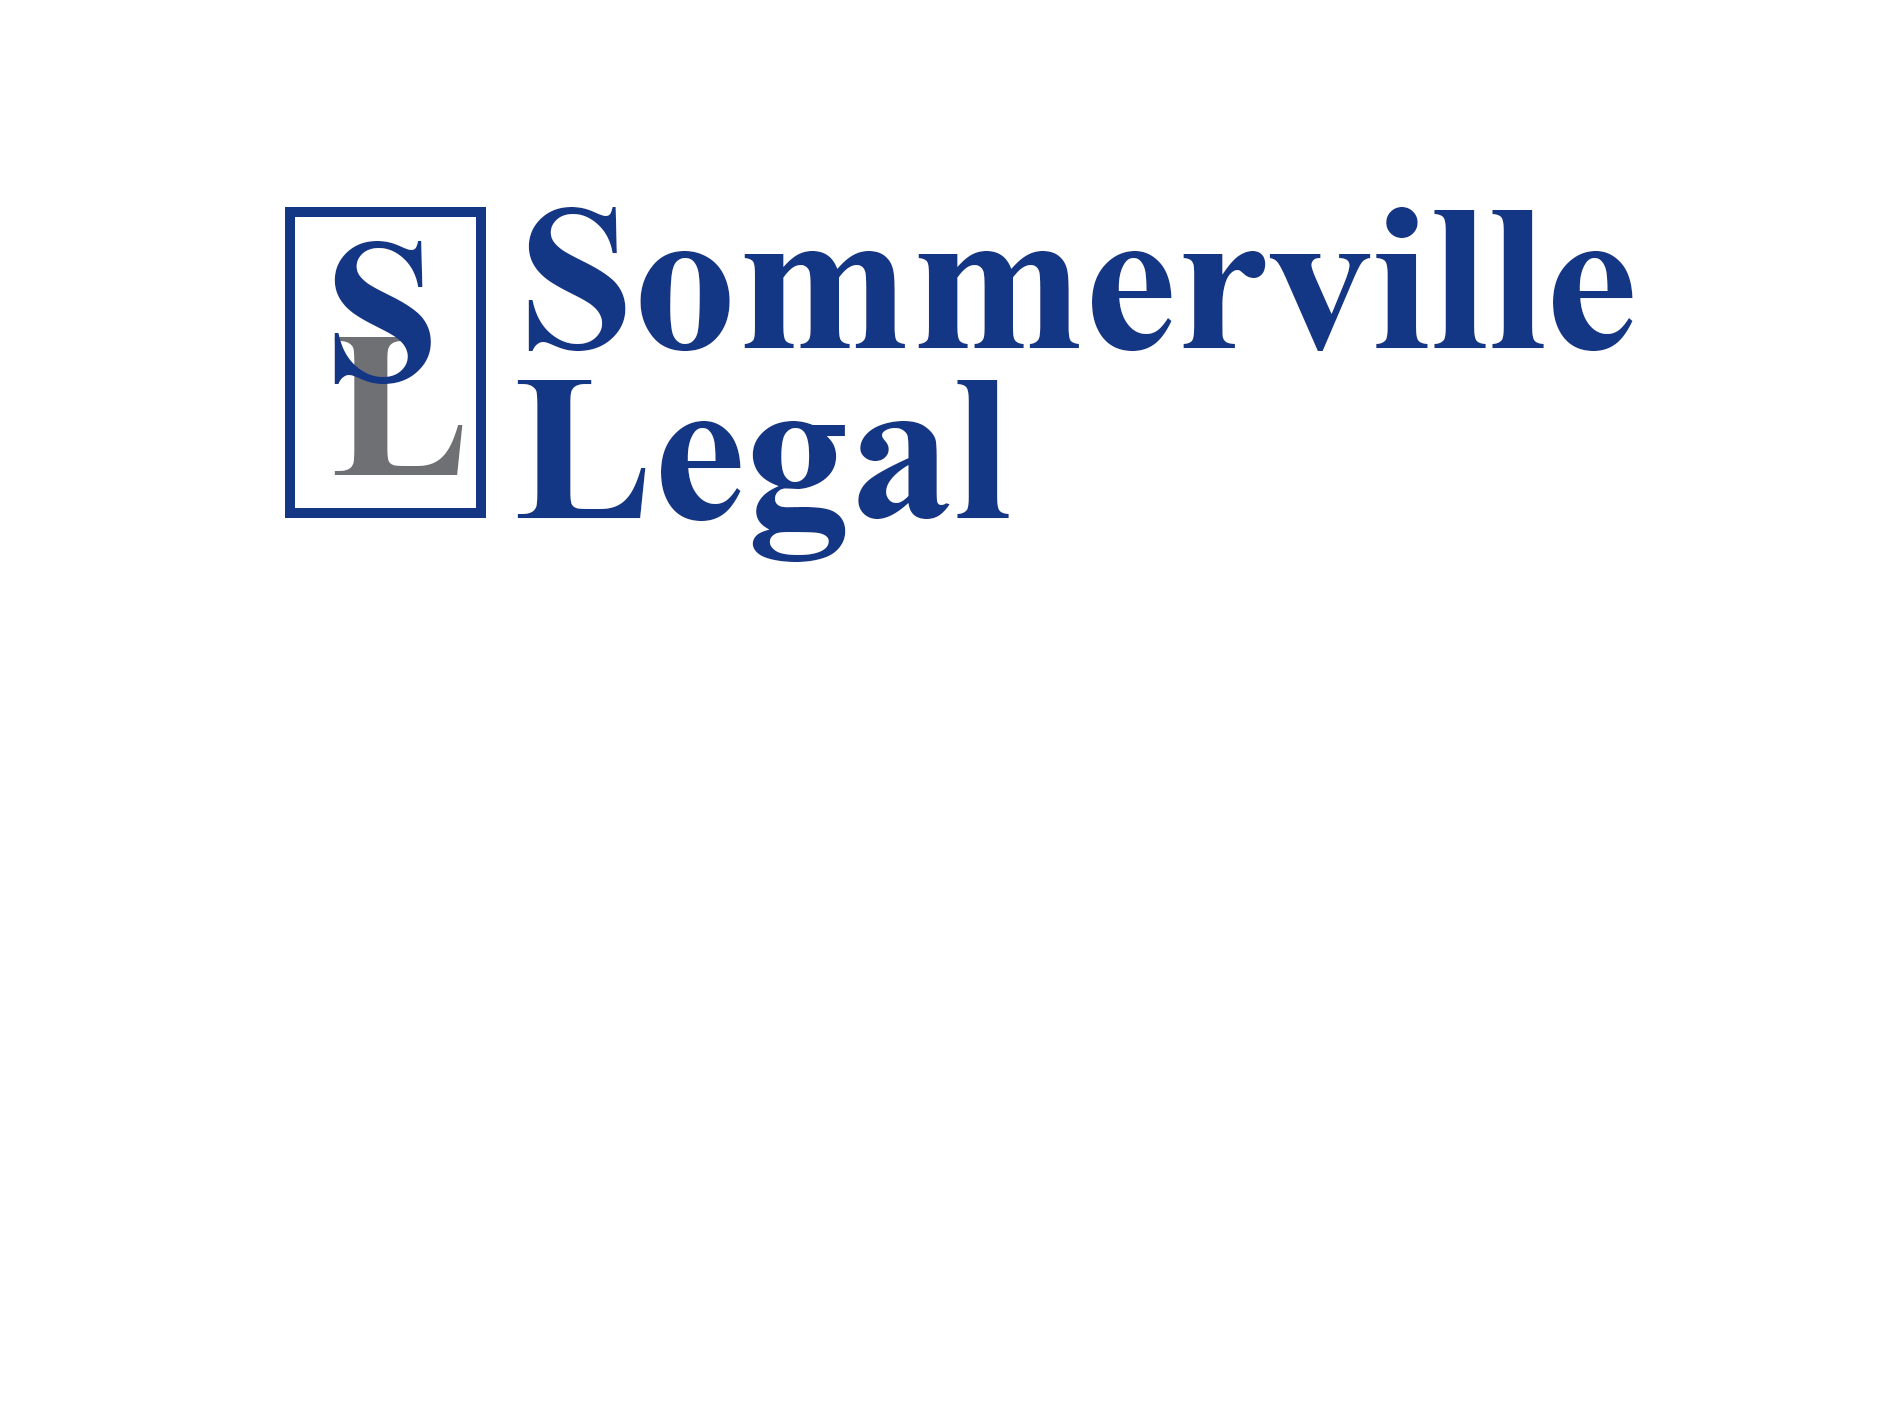 Company logo of Sommerville Legal